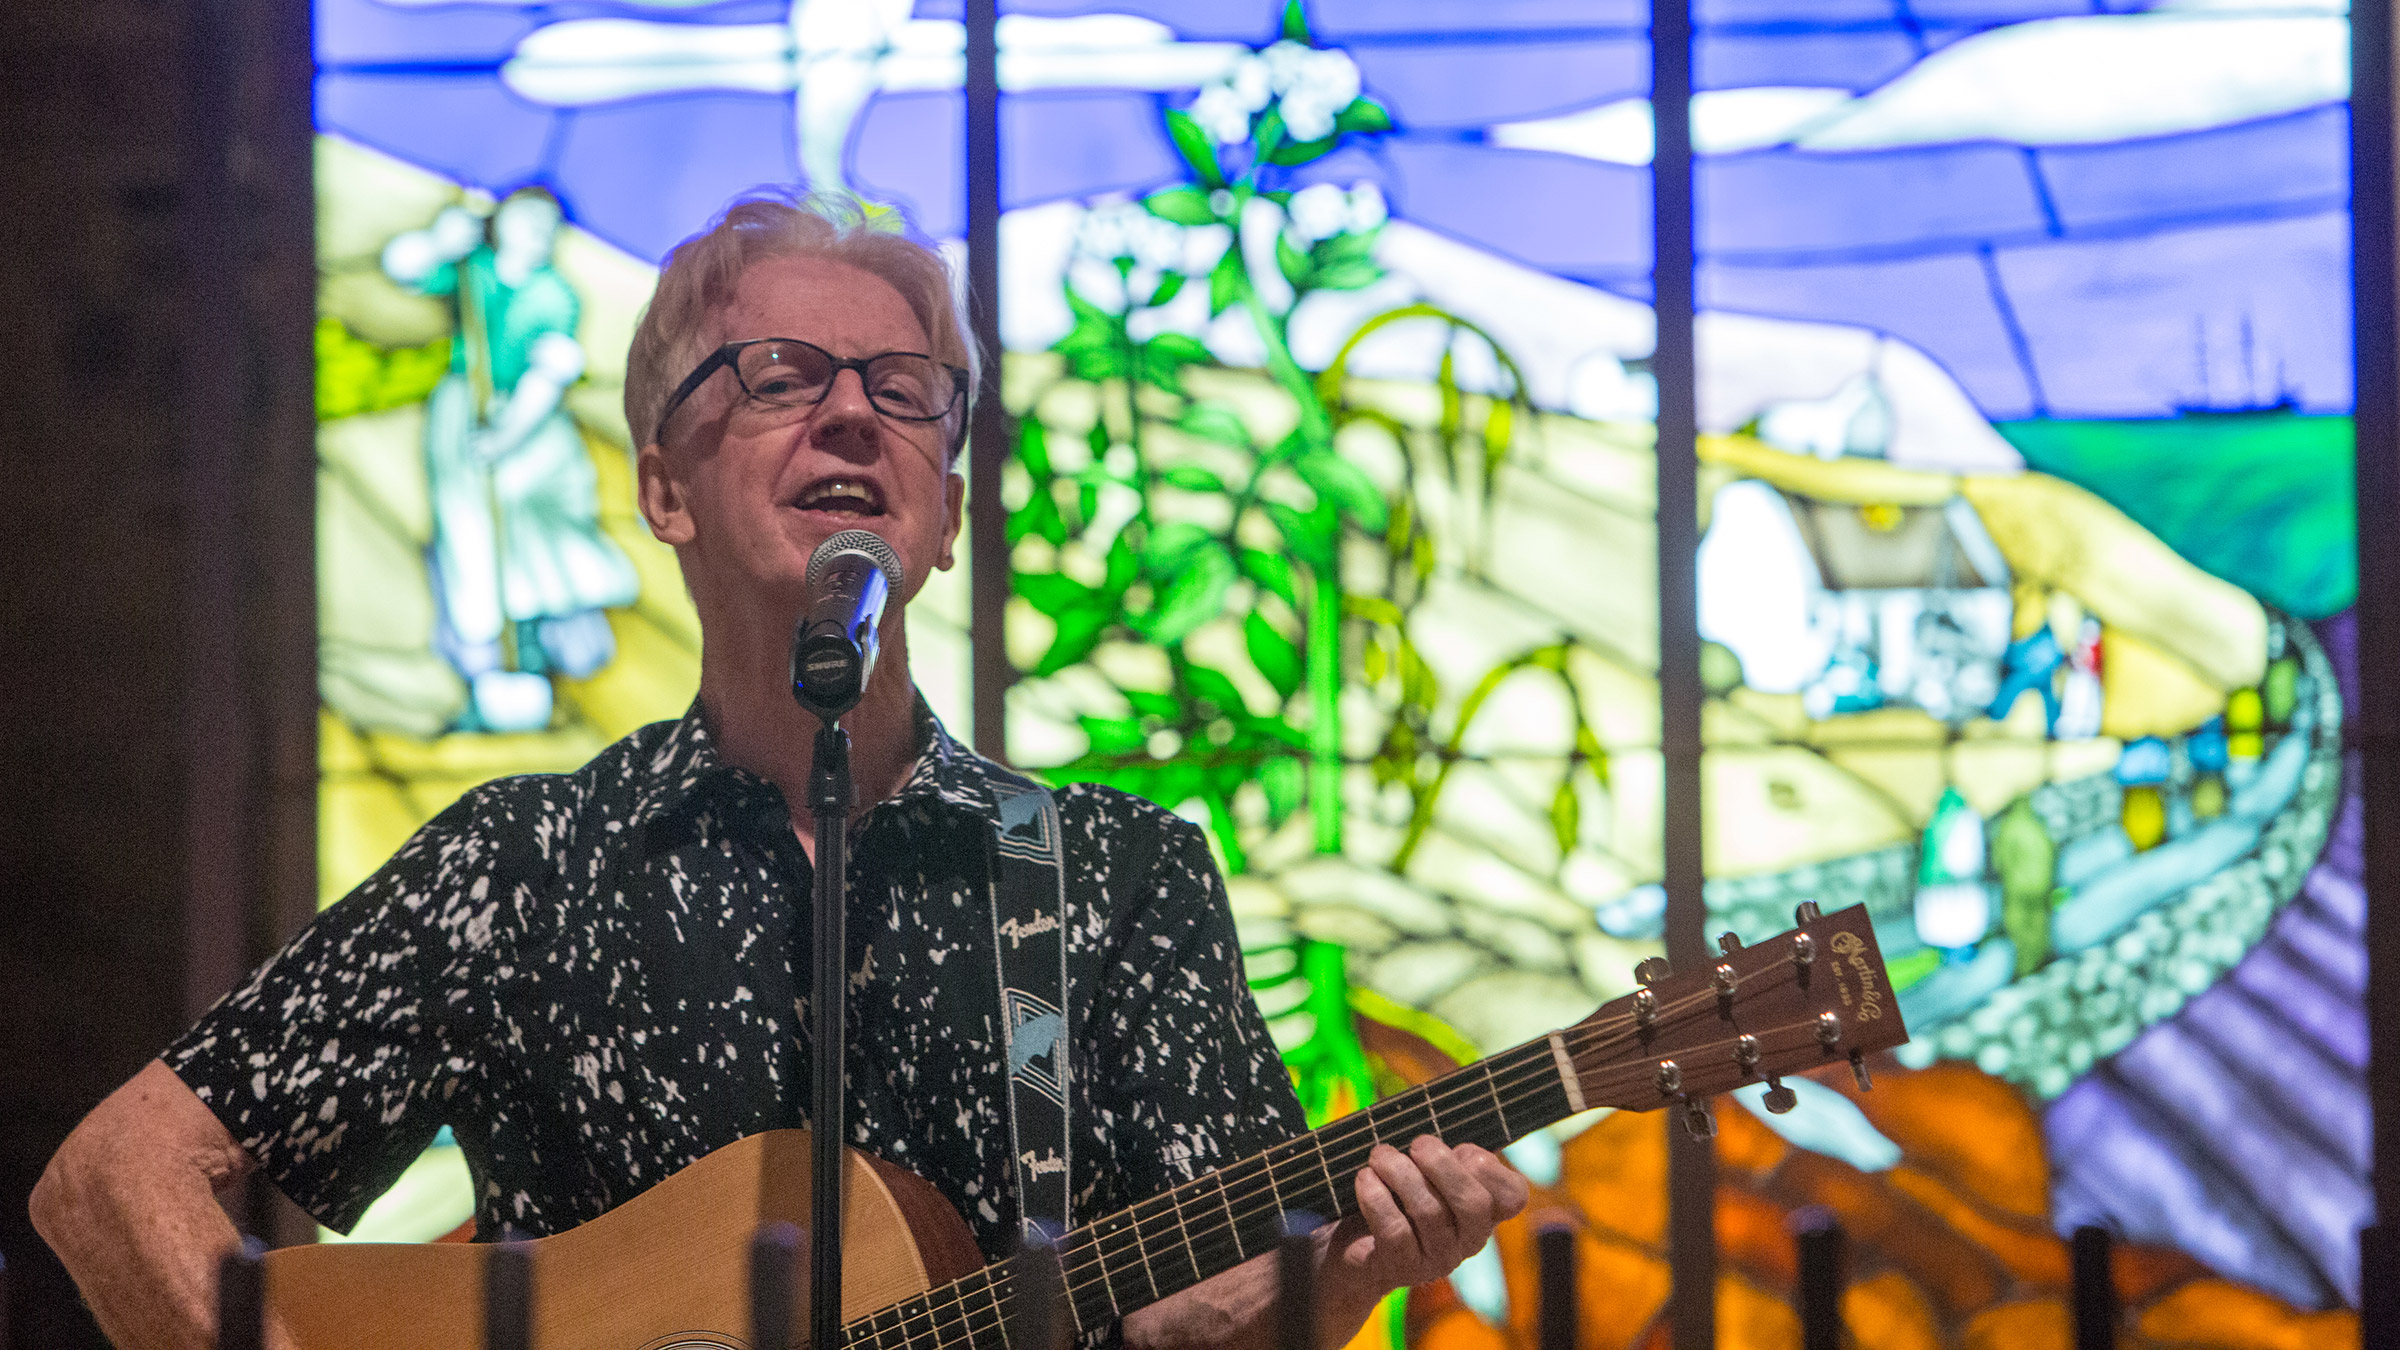 Larry Kirwin, a founding member of the Irish Musical group Black 47, performs his music and reads from his book at Ireland’s Great Hunger Museum during the Rock and Read, a program that combines both music and literature, September 12, 2015 at the museum in Hamden, Conn. (For Quinnipiac University/ Michelle McLoughlin)